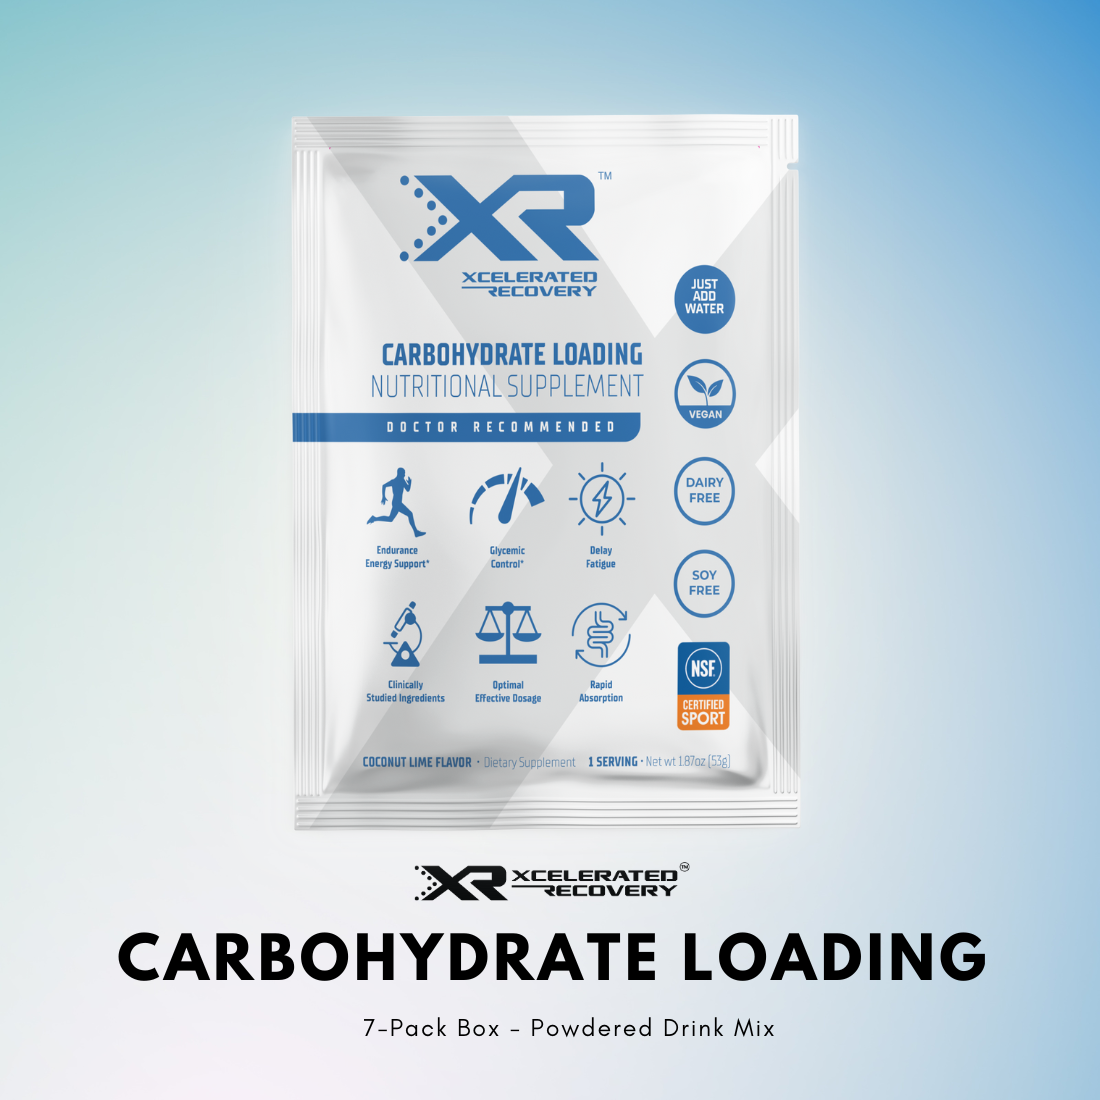 Carbohydrate loading and recovery drinks